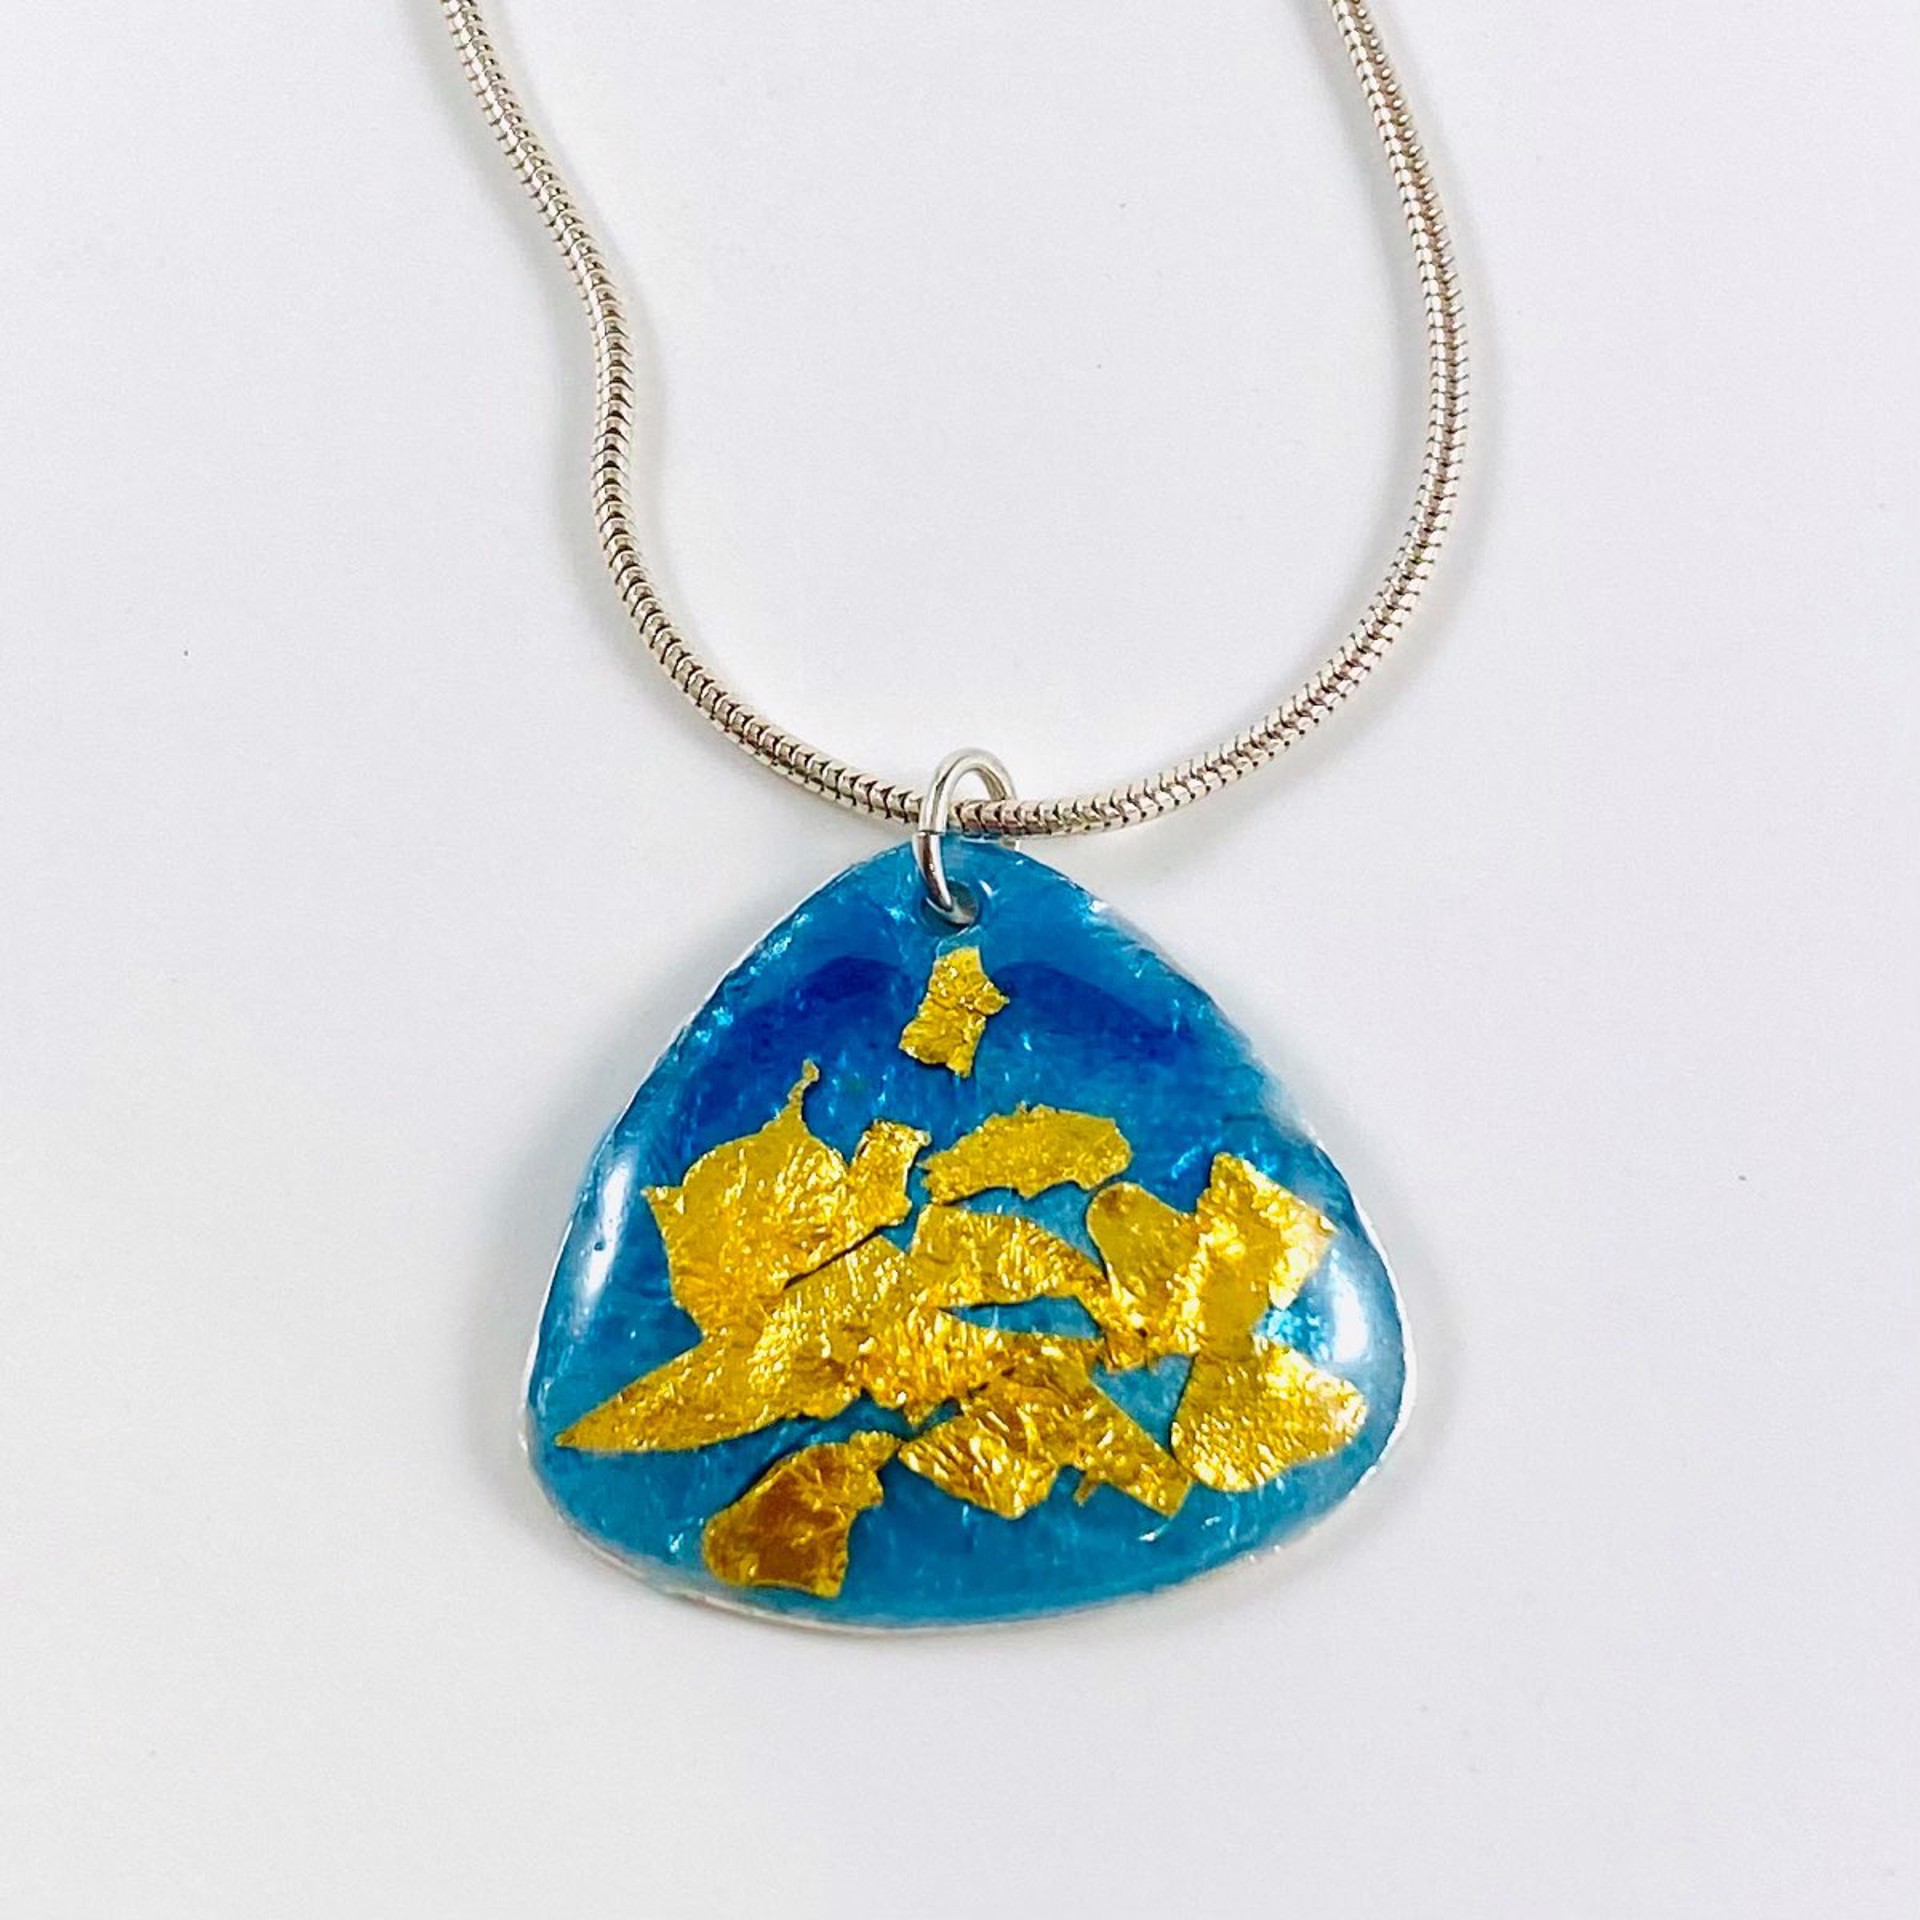 KH22-23 Rounded Triangle  Blue and Gold Vitreous Enamel Pendant 18"Snake Chain by Karen Hakim